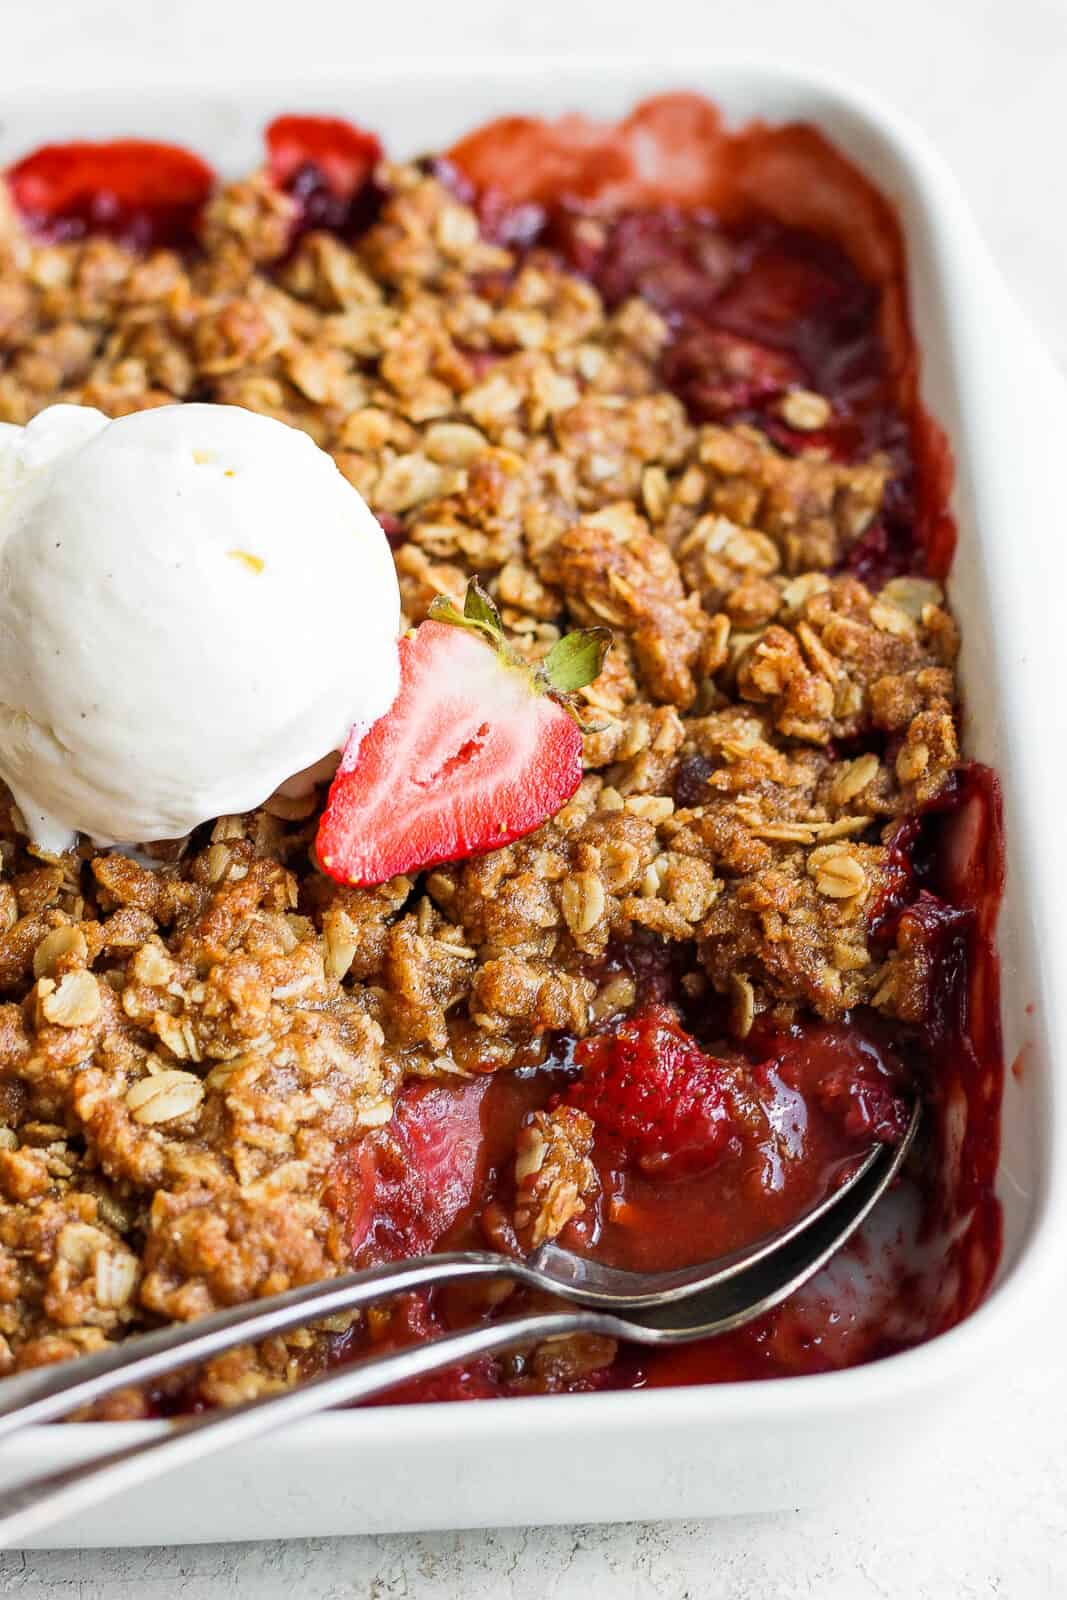 Strawberry crisp with 2 spoons.